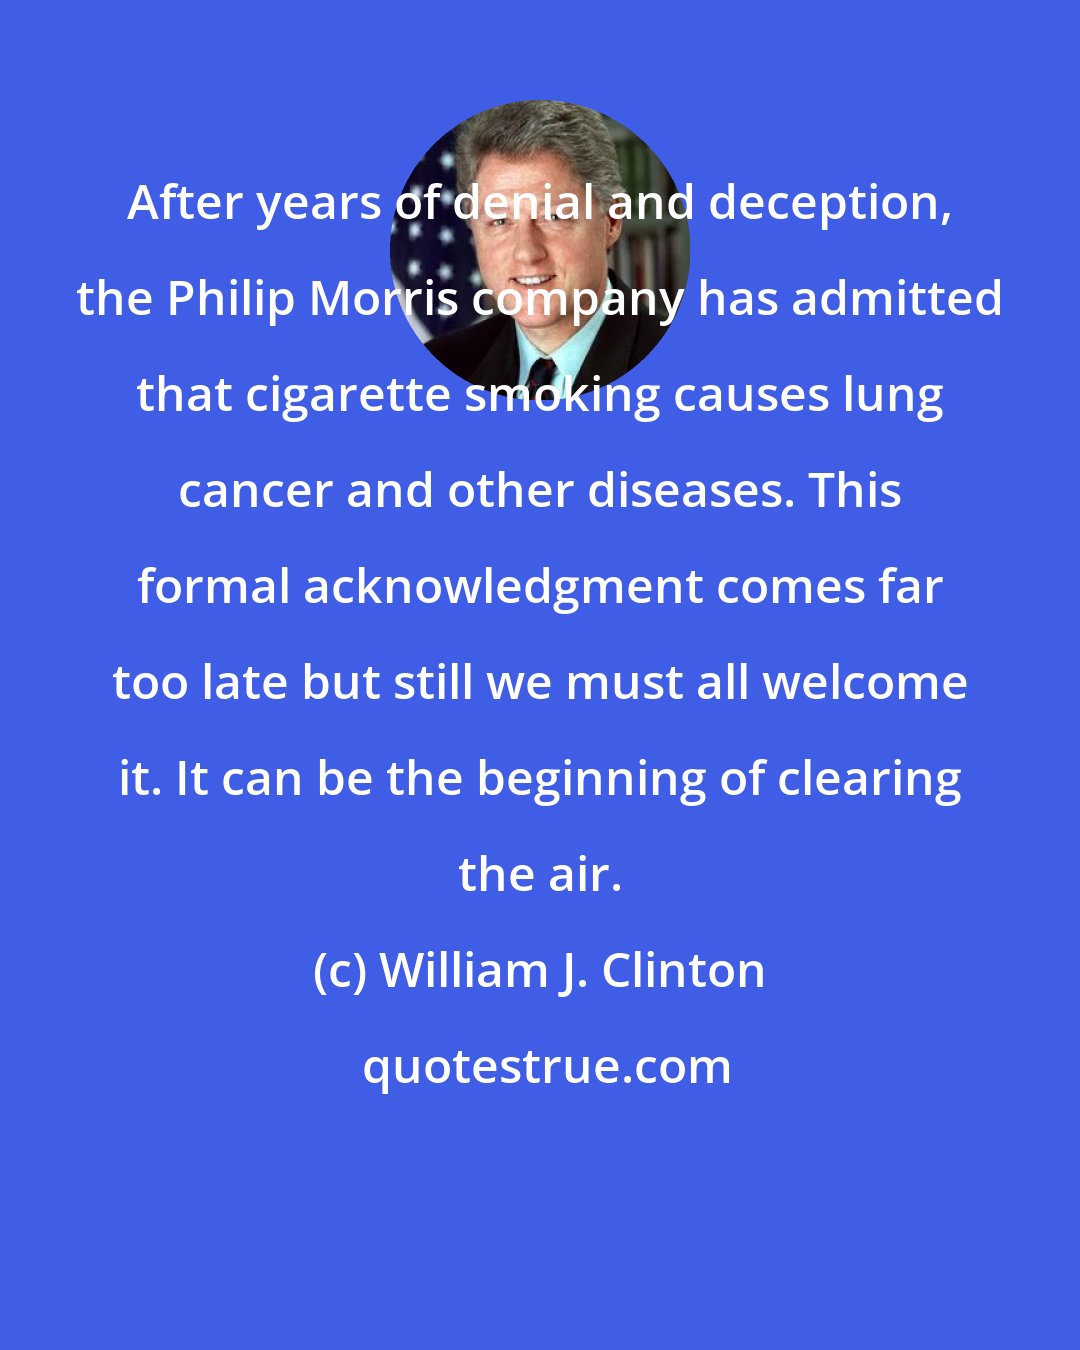 William J. Clinton: After years of denial and deception, the Philip Morris company has admitted that cigarette smoking causes lung cancer and other diseases. This formal acknowledgment comes far too late but still we must all welcome it. It can be the beginning of clearing the air.